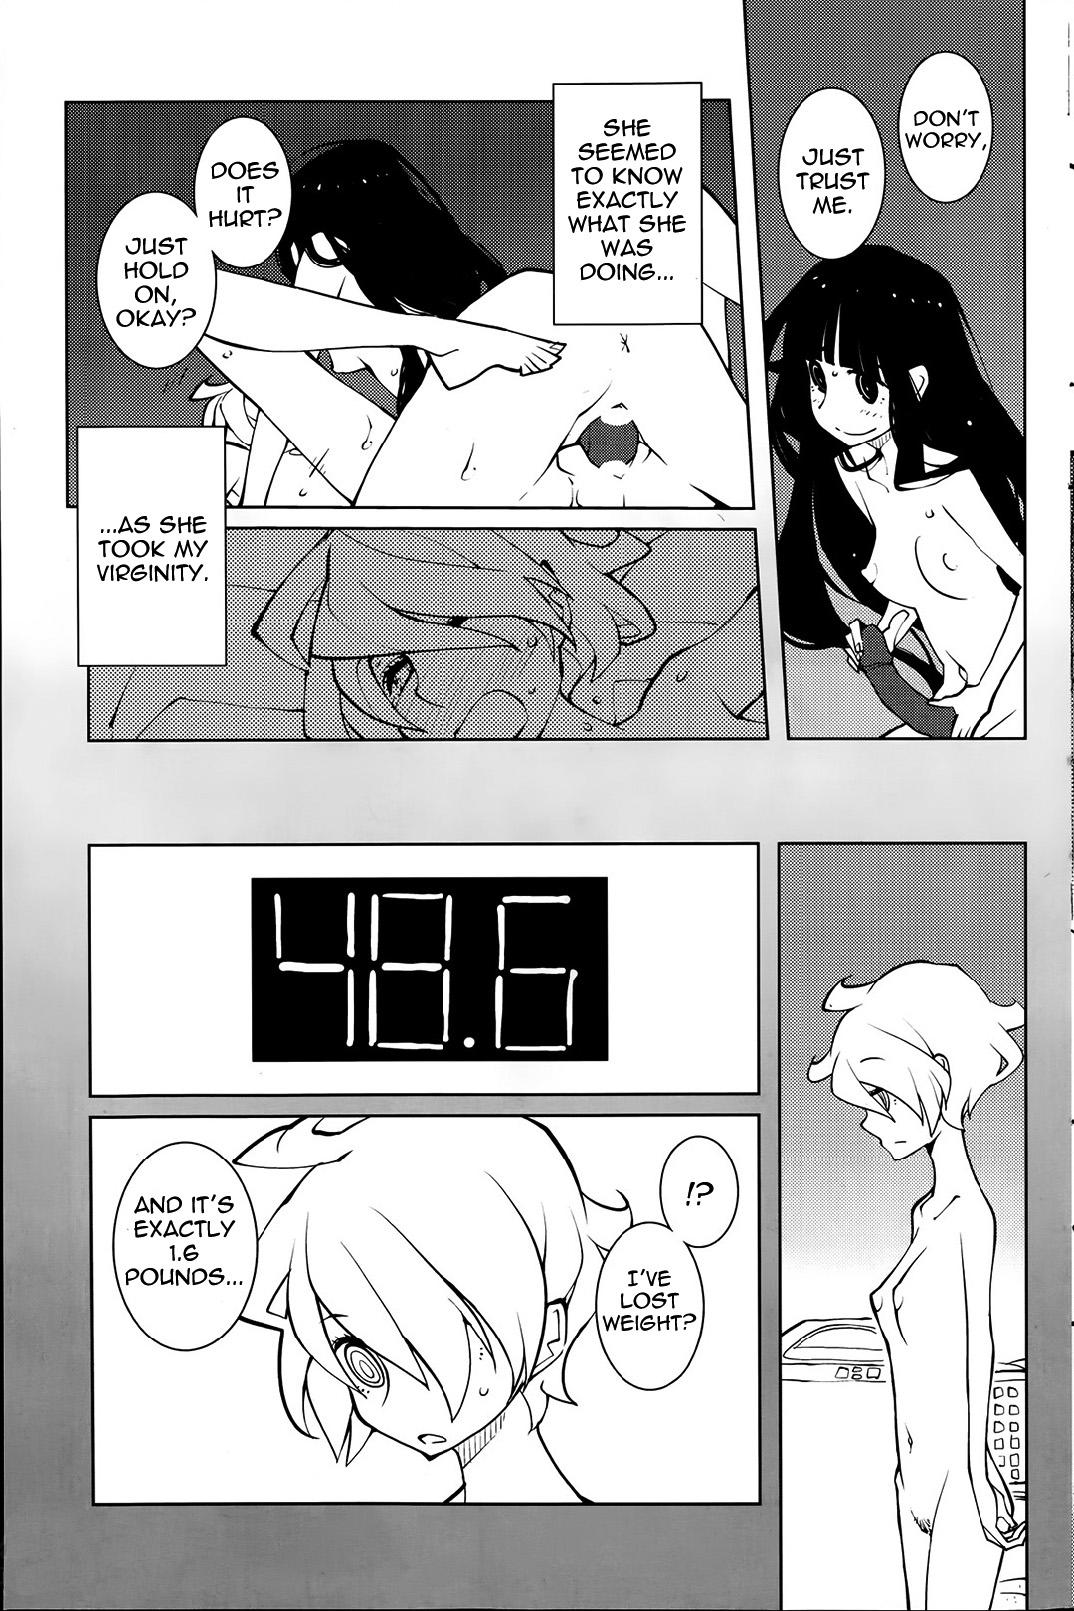 Weight Lovers Page 7 Of 8 hentai comic, Weight Lovers Page 7 Of 8 hentai do...